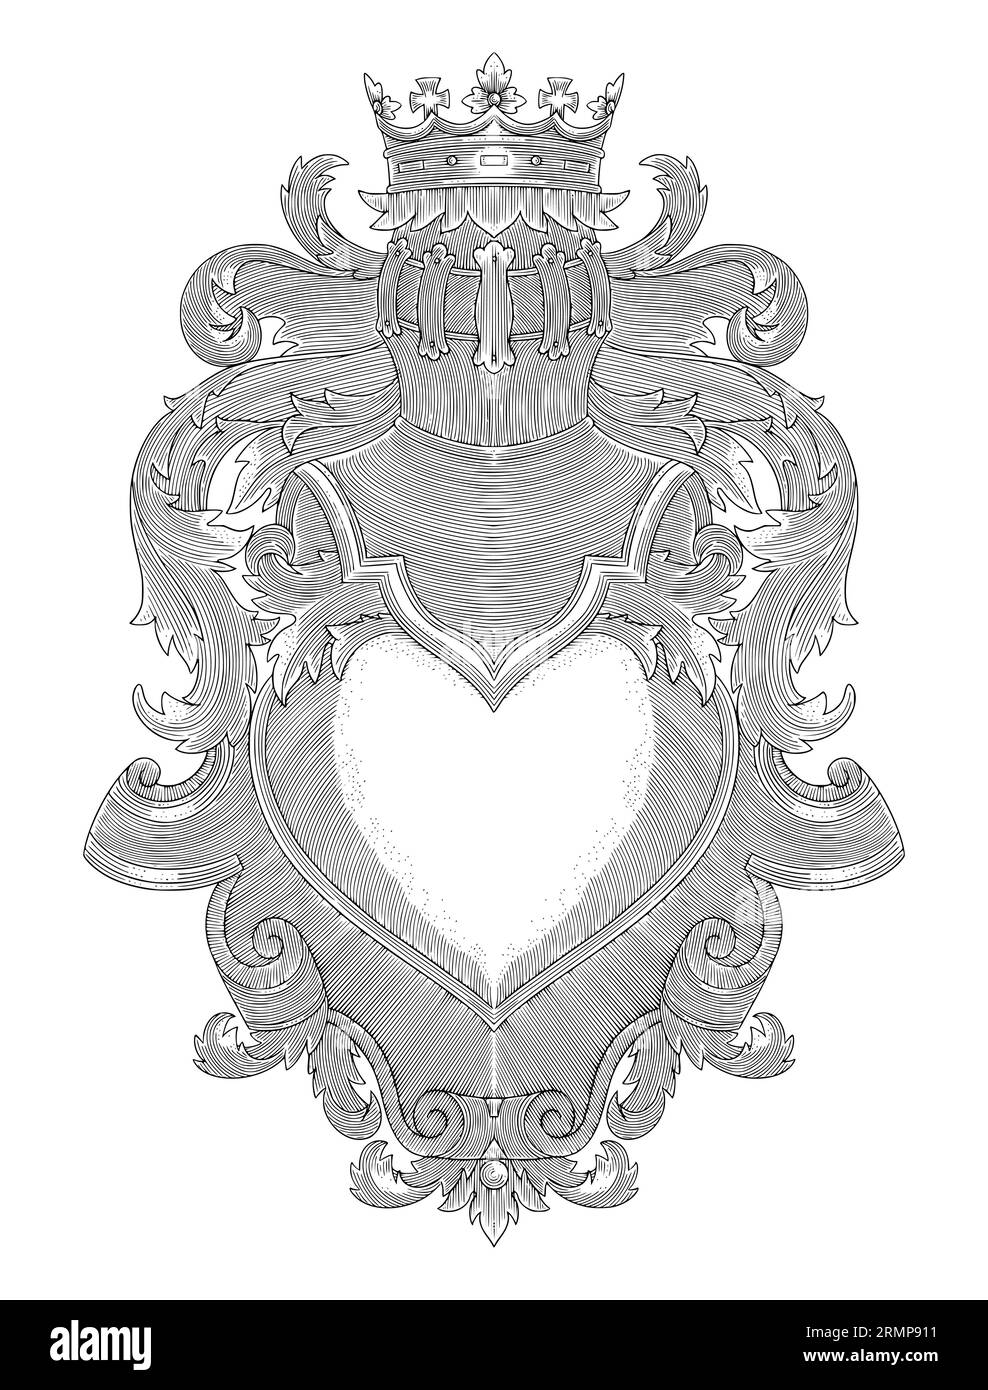 Family coat of arms, vintage engraving drawing style vector illustration Stock Vector